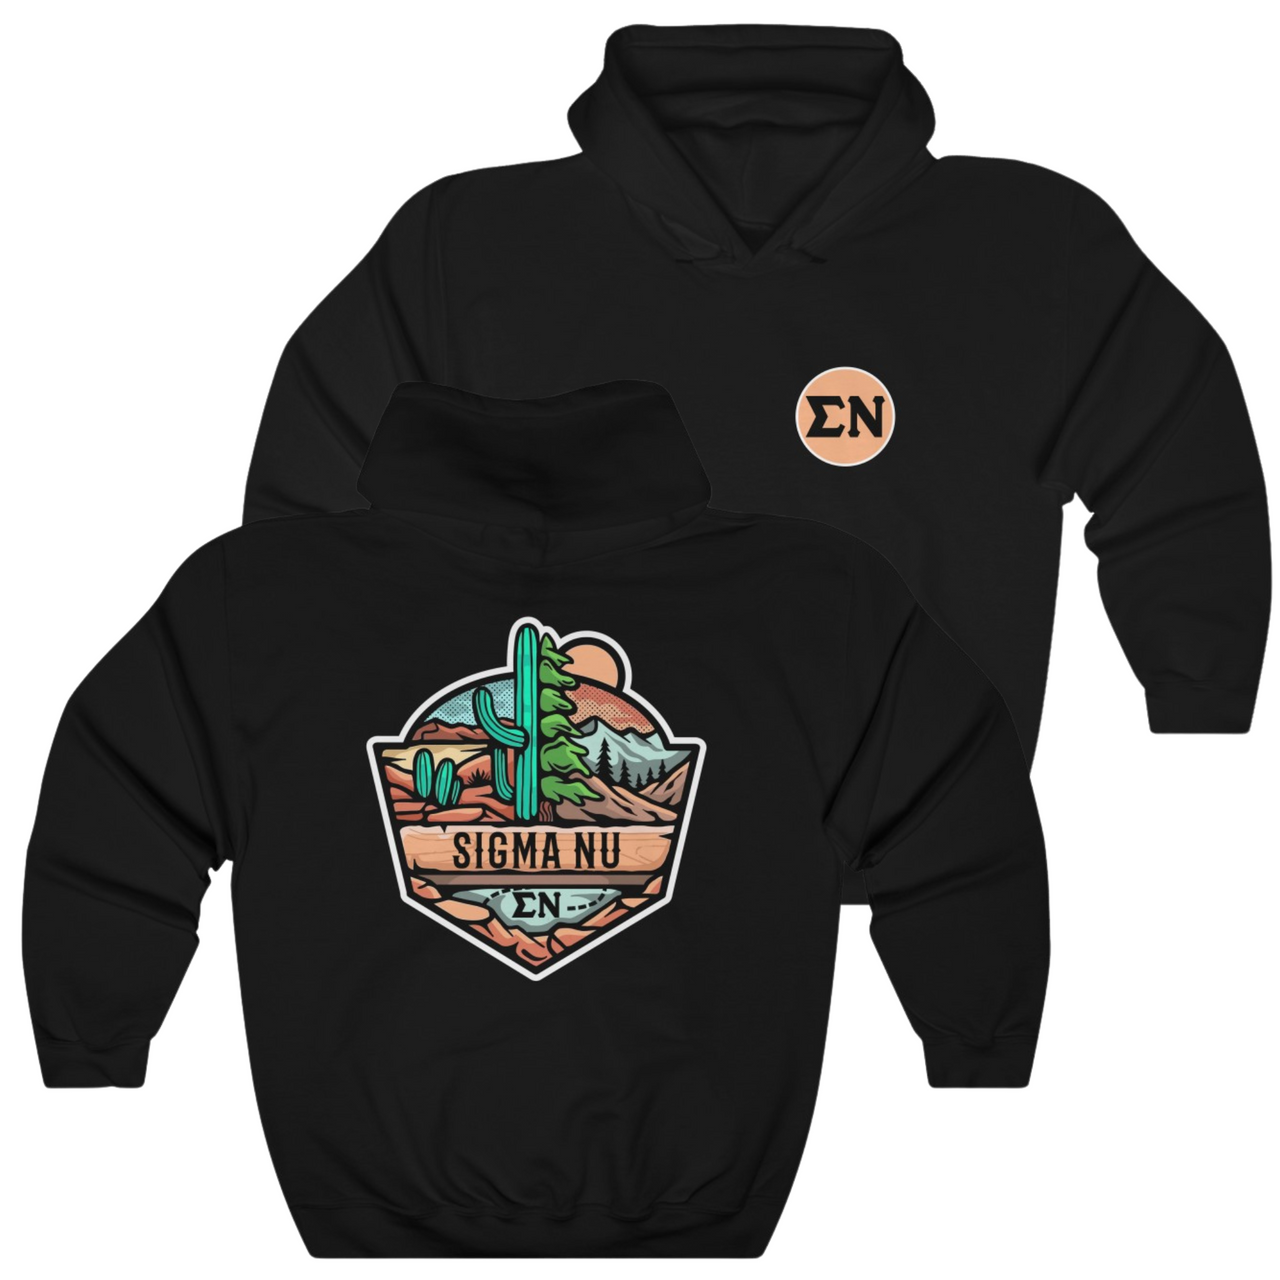 Black Sigma Nu Graphic Hoodie | Desert Mountains | Sigma Nu Clothing, Apparel and Merchandise